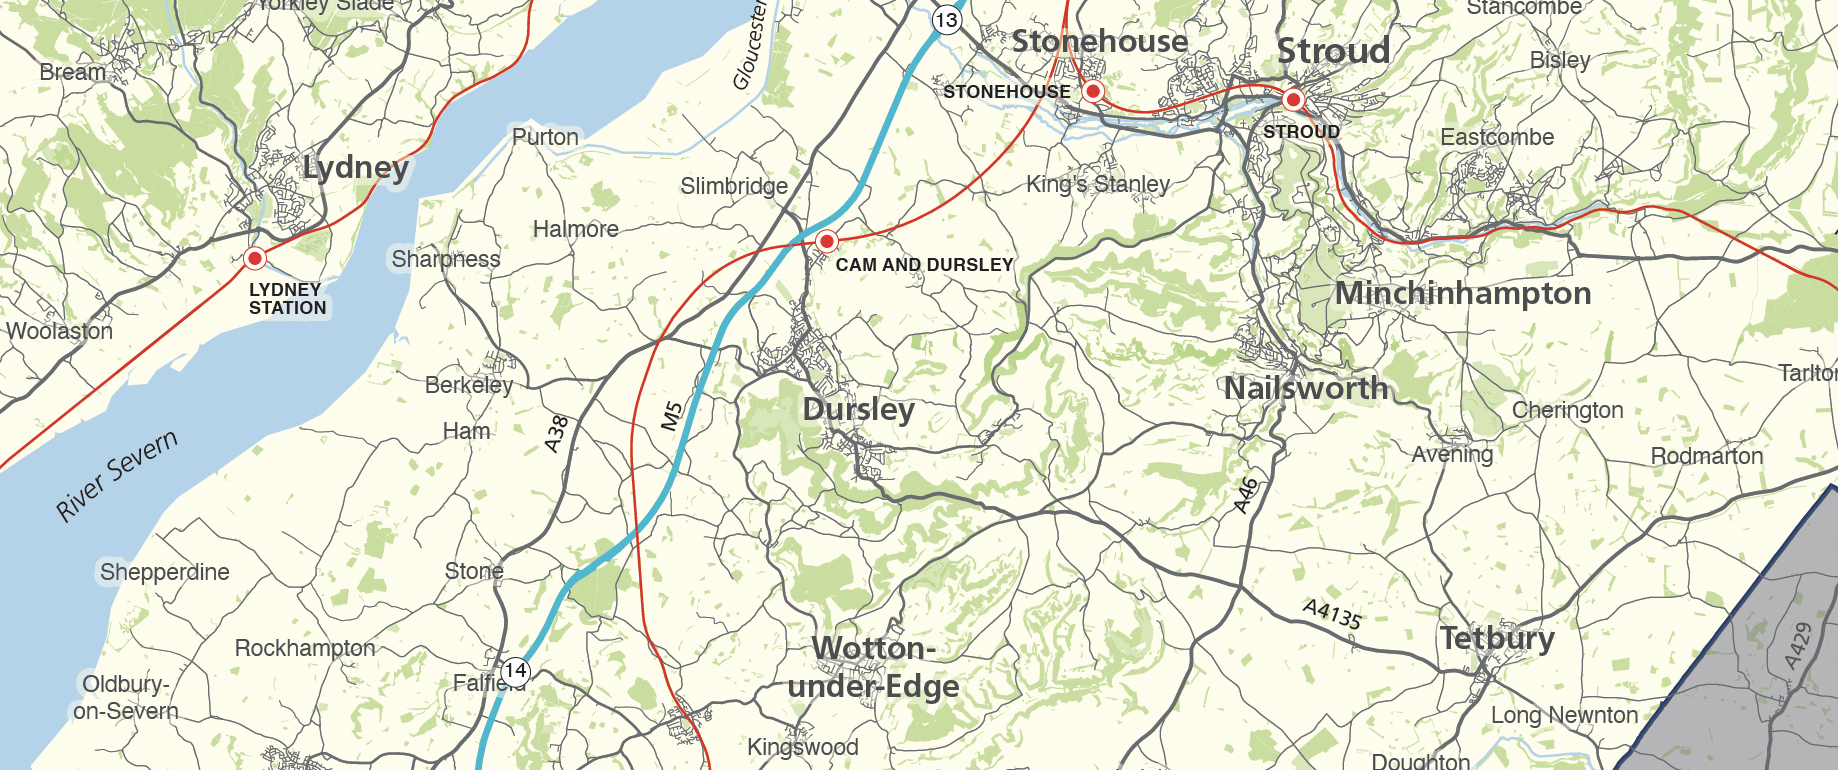 Detail from Gloucestershire county map